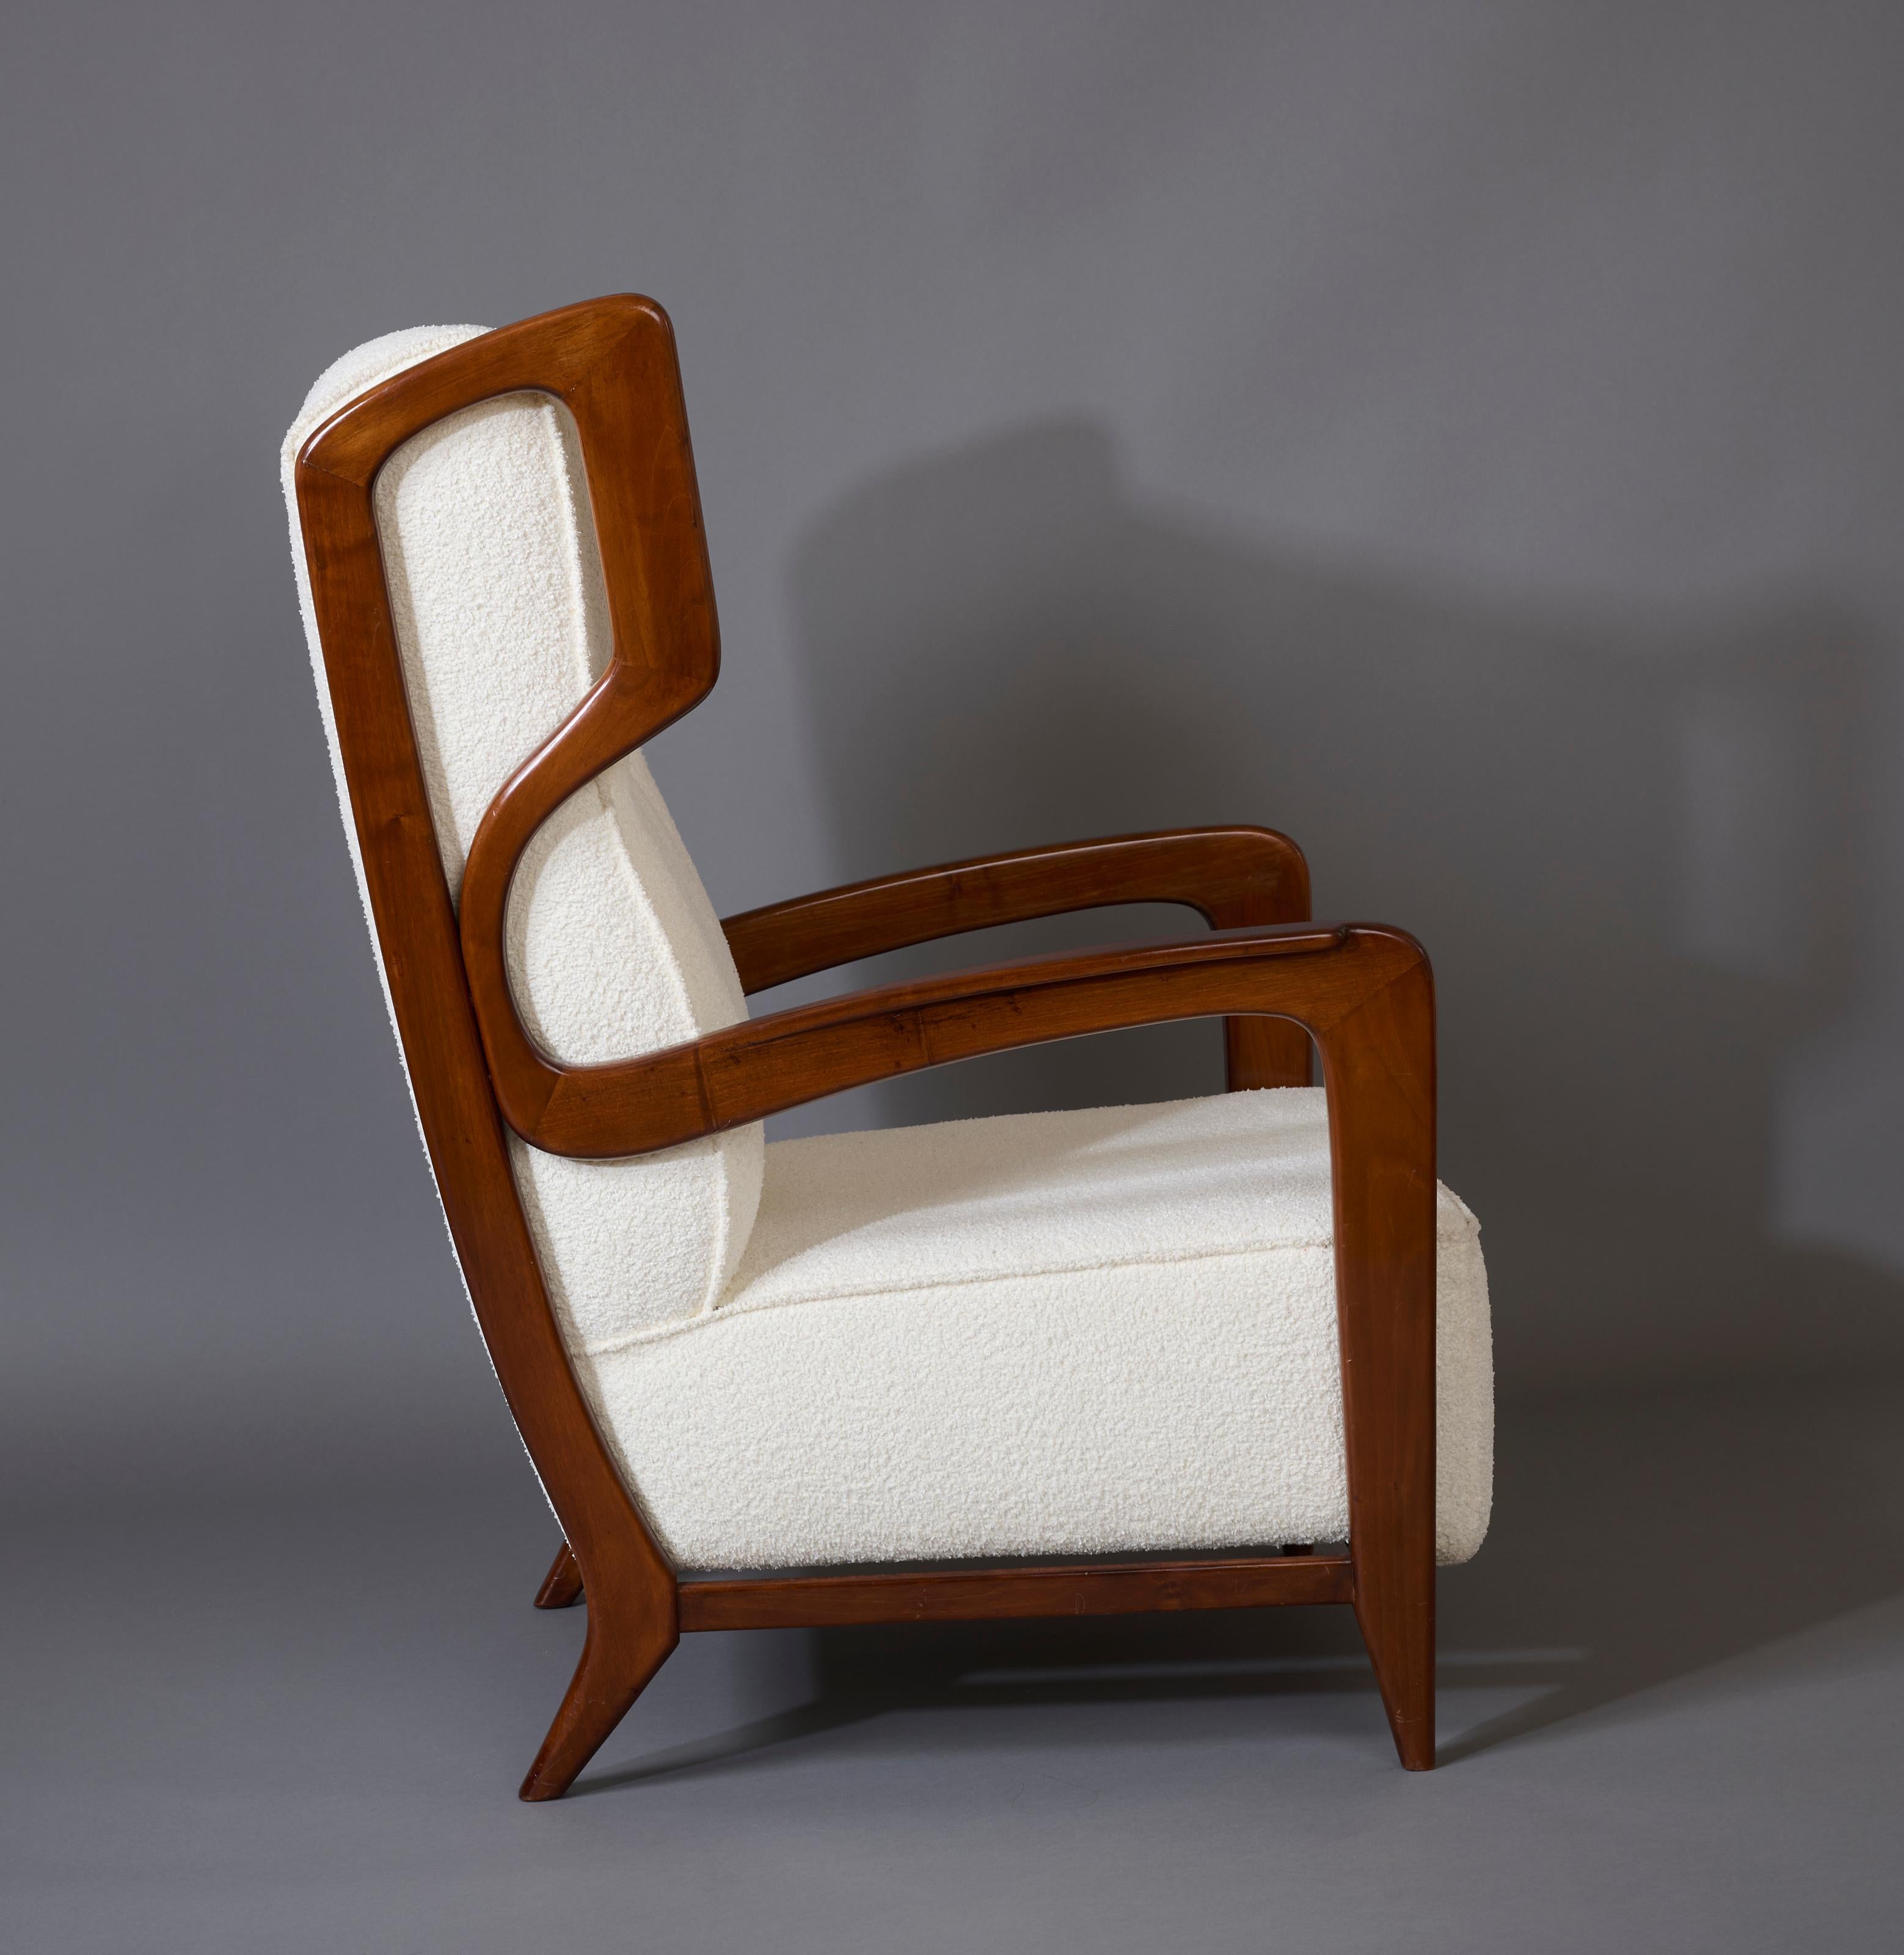 Gio Ponti, Exceptional Pair of Rare Wingback Armchairs in Walnut, Italy, 1940s For Sale 5